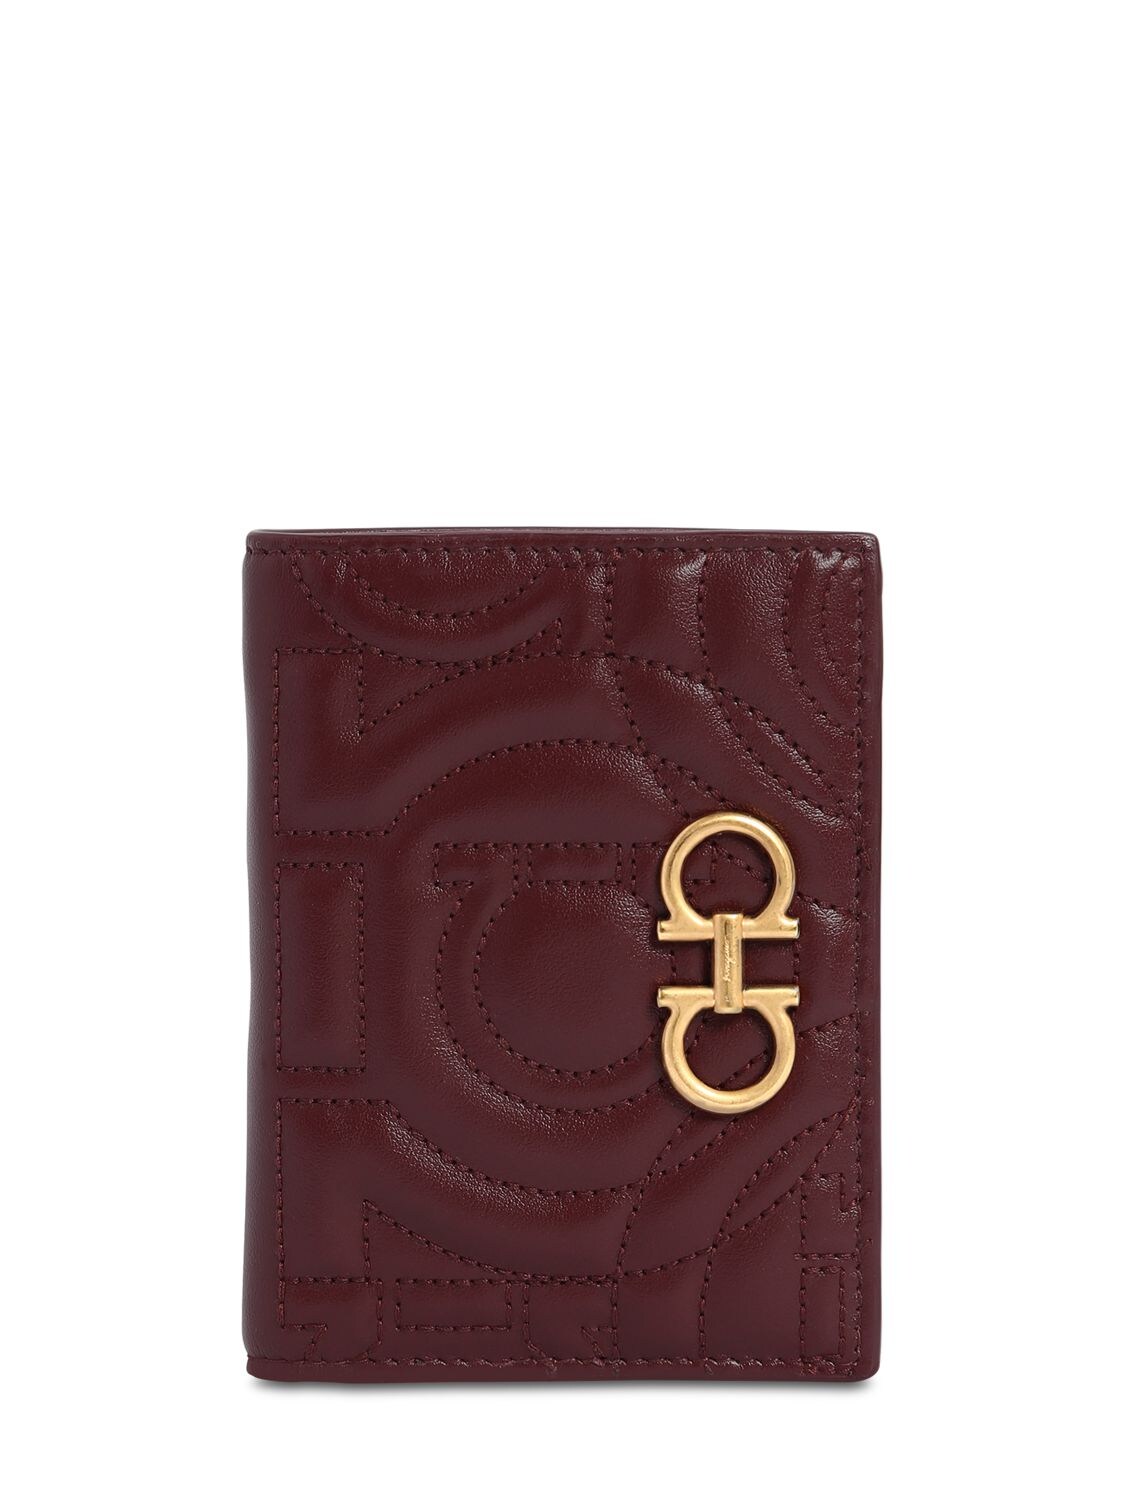 Ferragamo Quilted Leather Card Holder In Nebbiolo